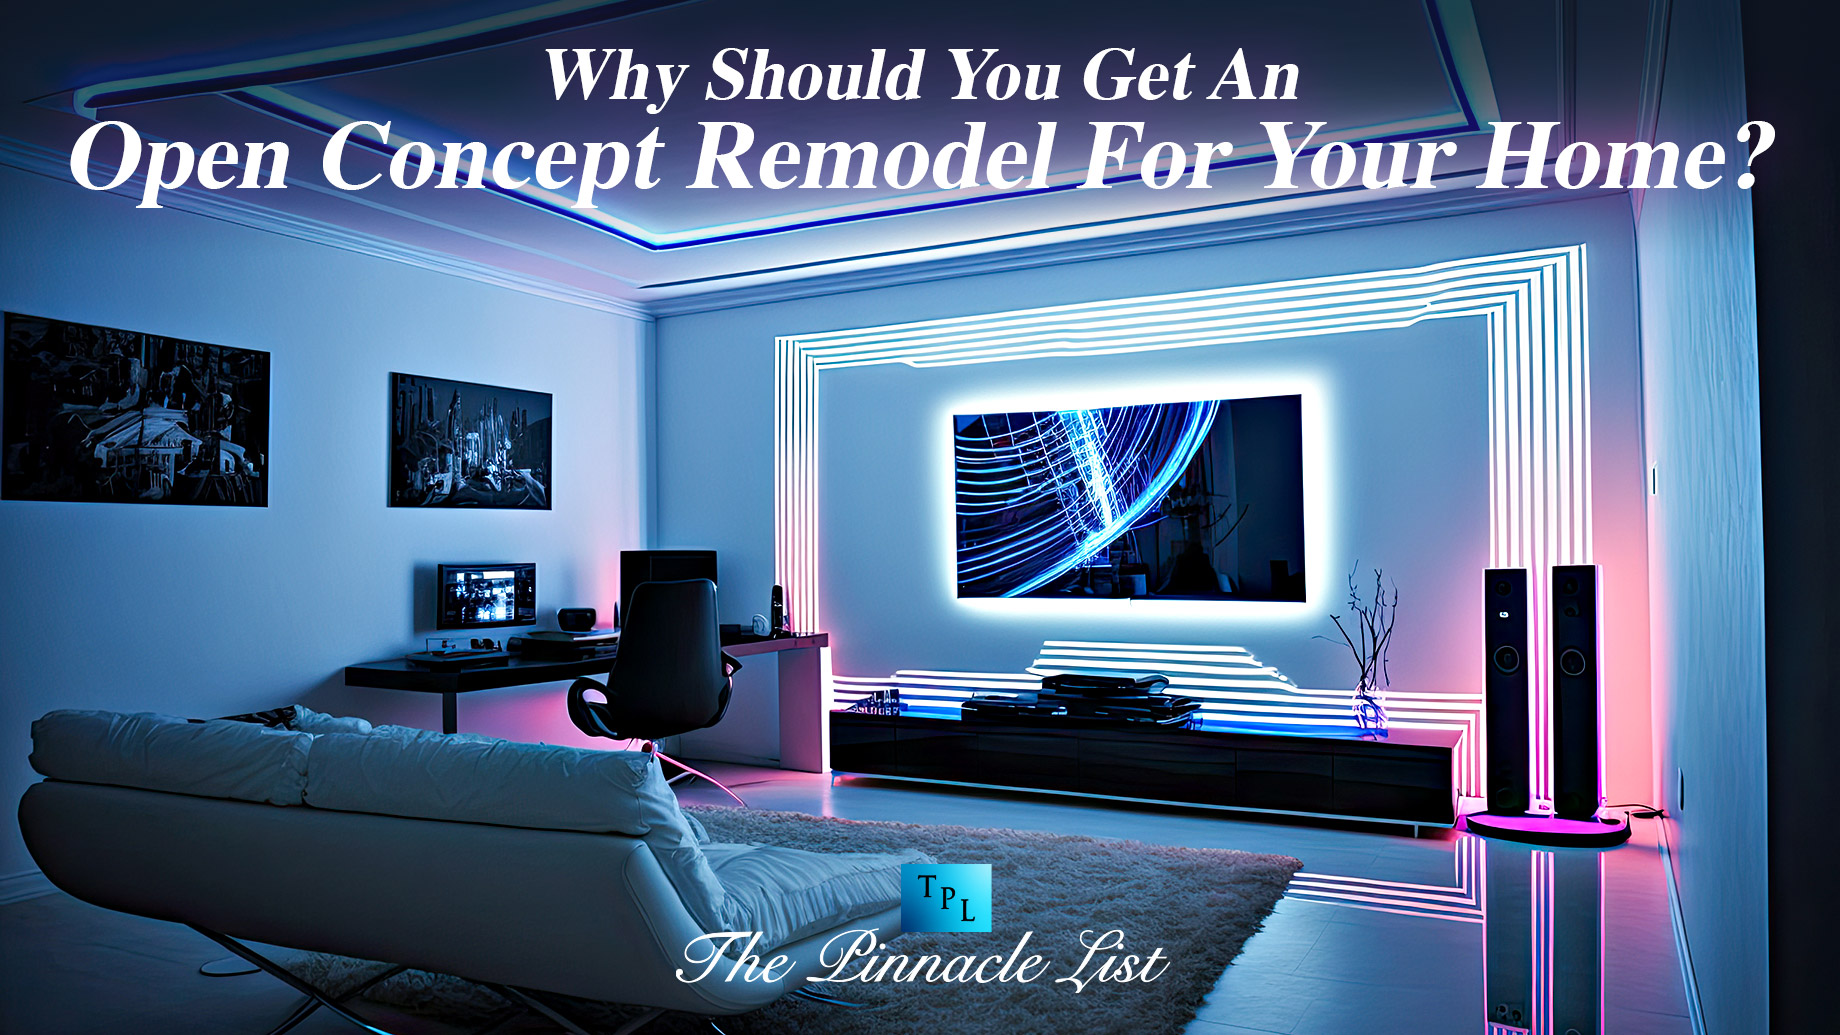 Why Should You Get An Open Concept Remodel For Your Home?